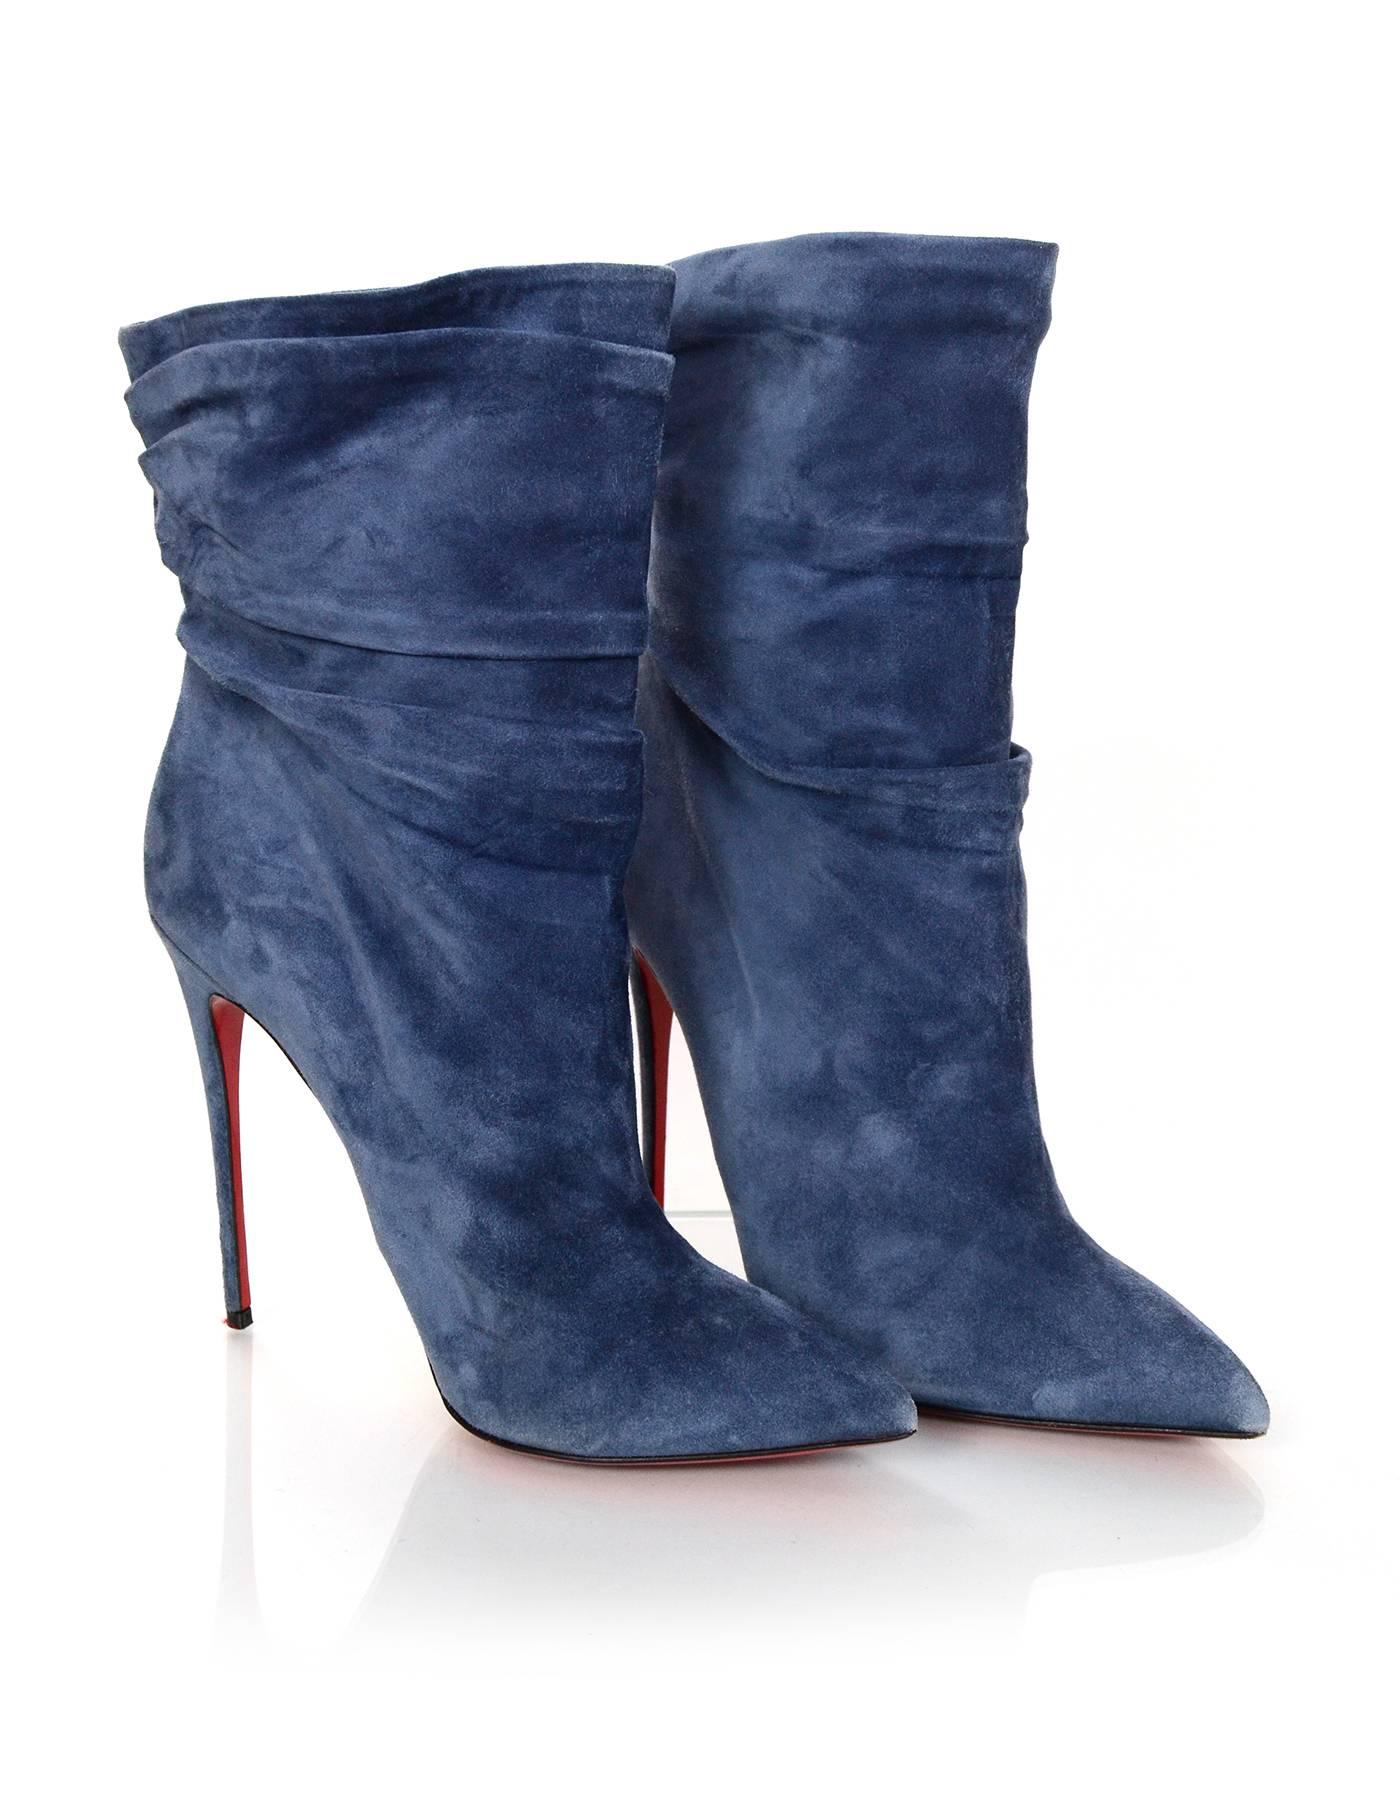 Women's Christian Louboutin Blue Suede Short Ruched Boots sz 41 w/DB